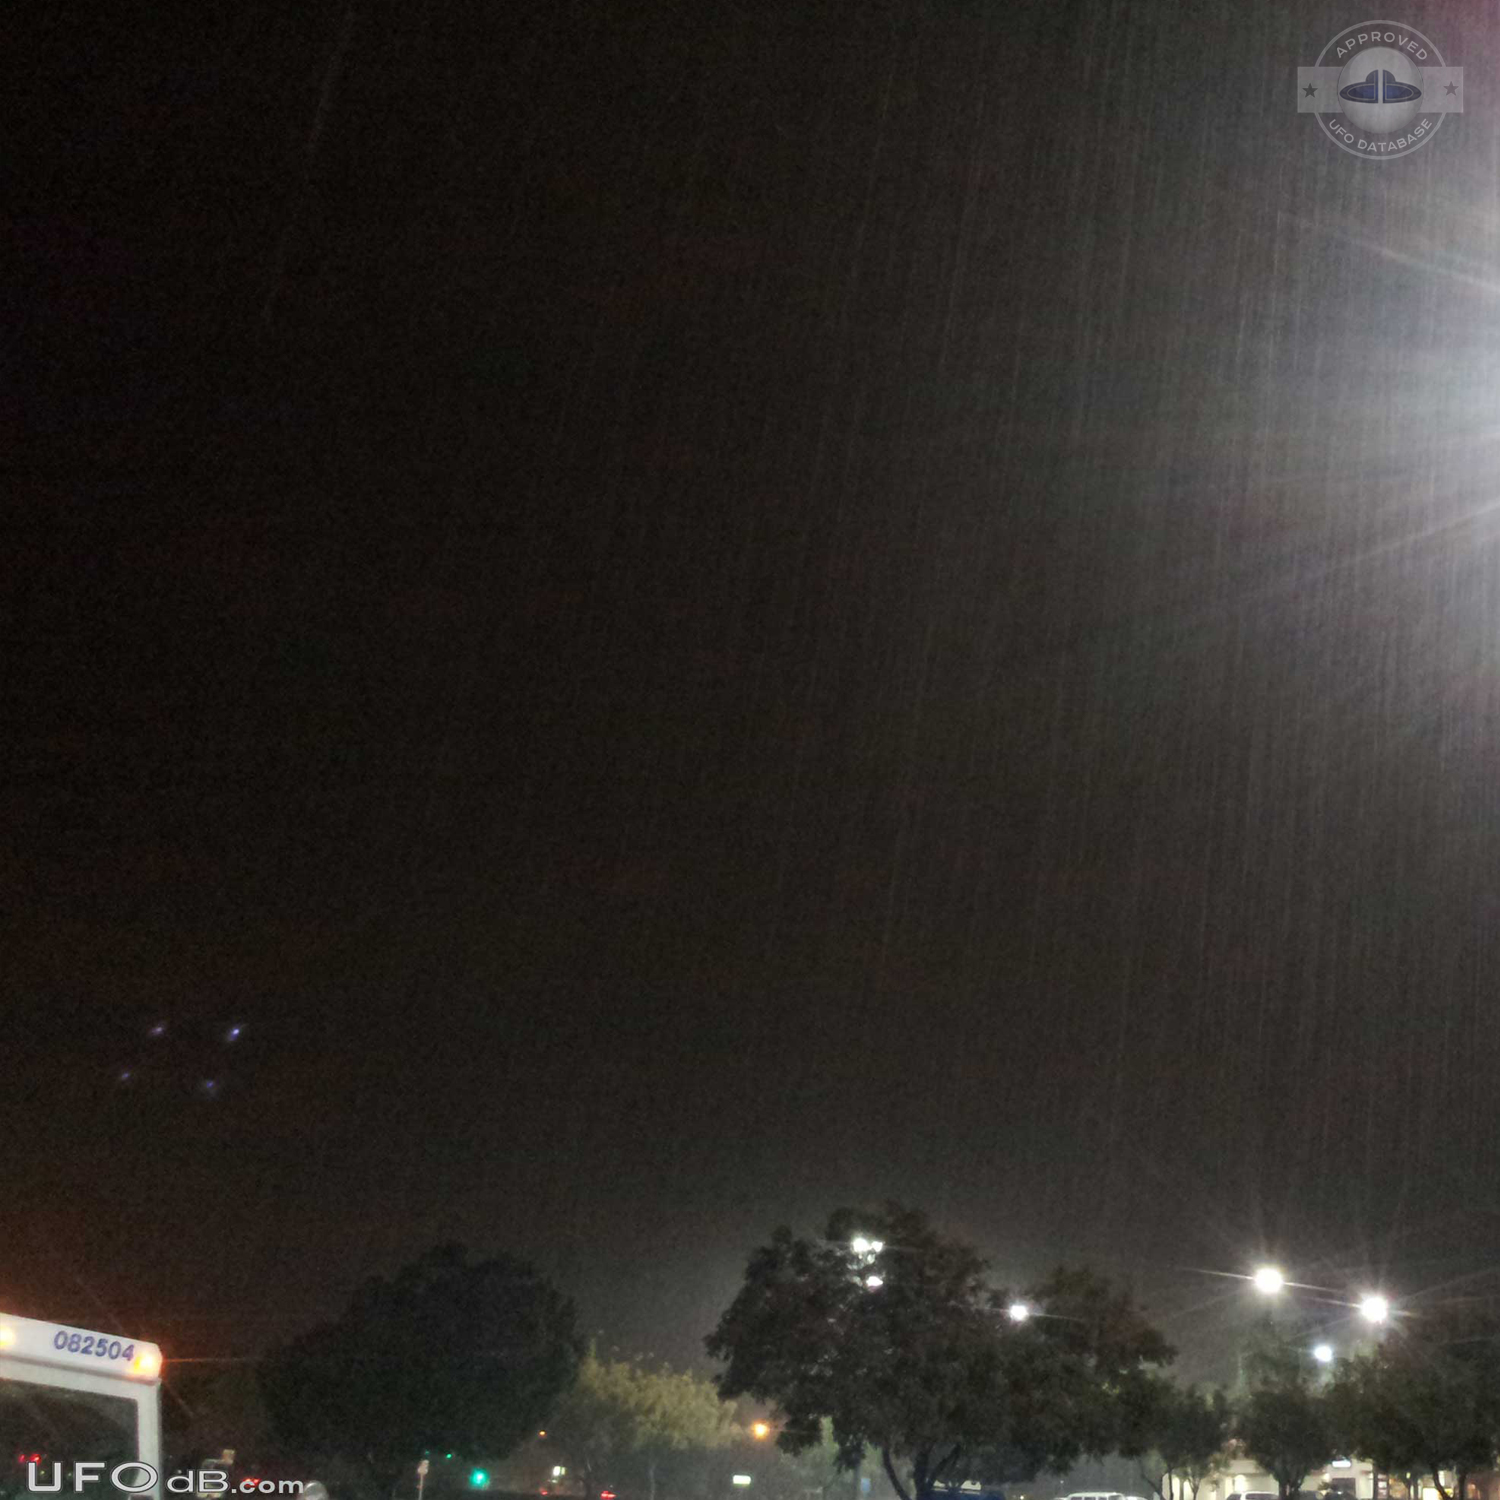 Square shaped UFO caught on picture during heavy rainfall - Rialto CA UFO Picture #384-5